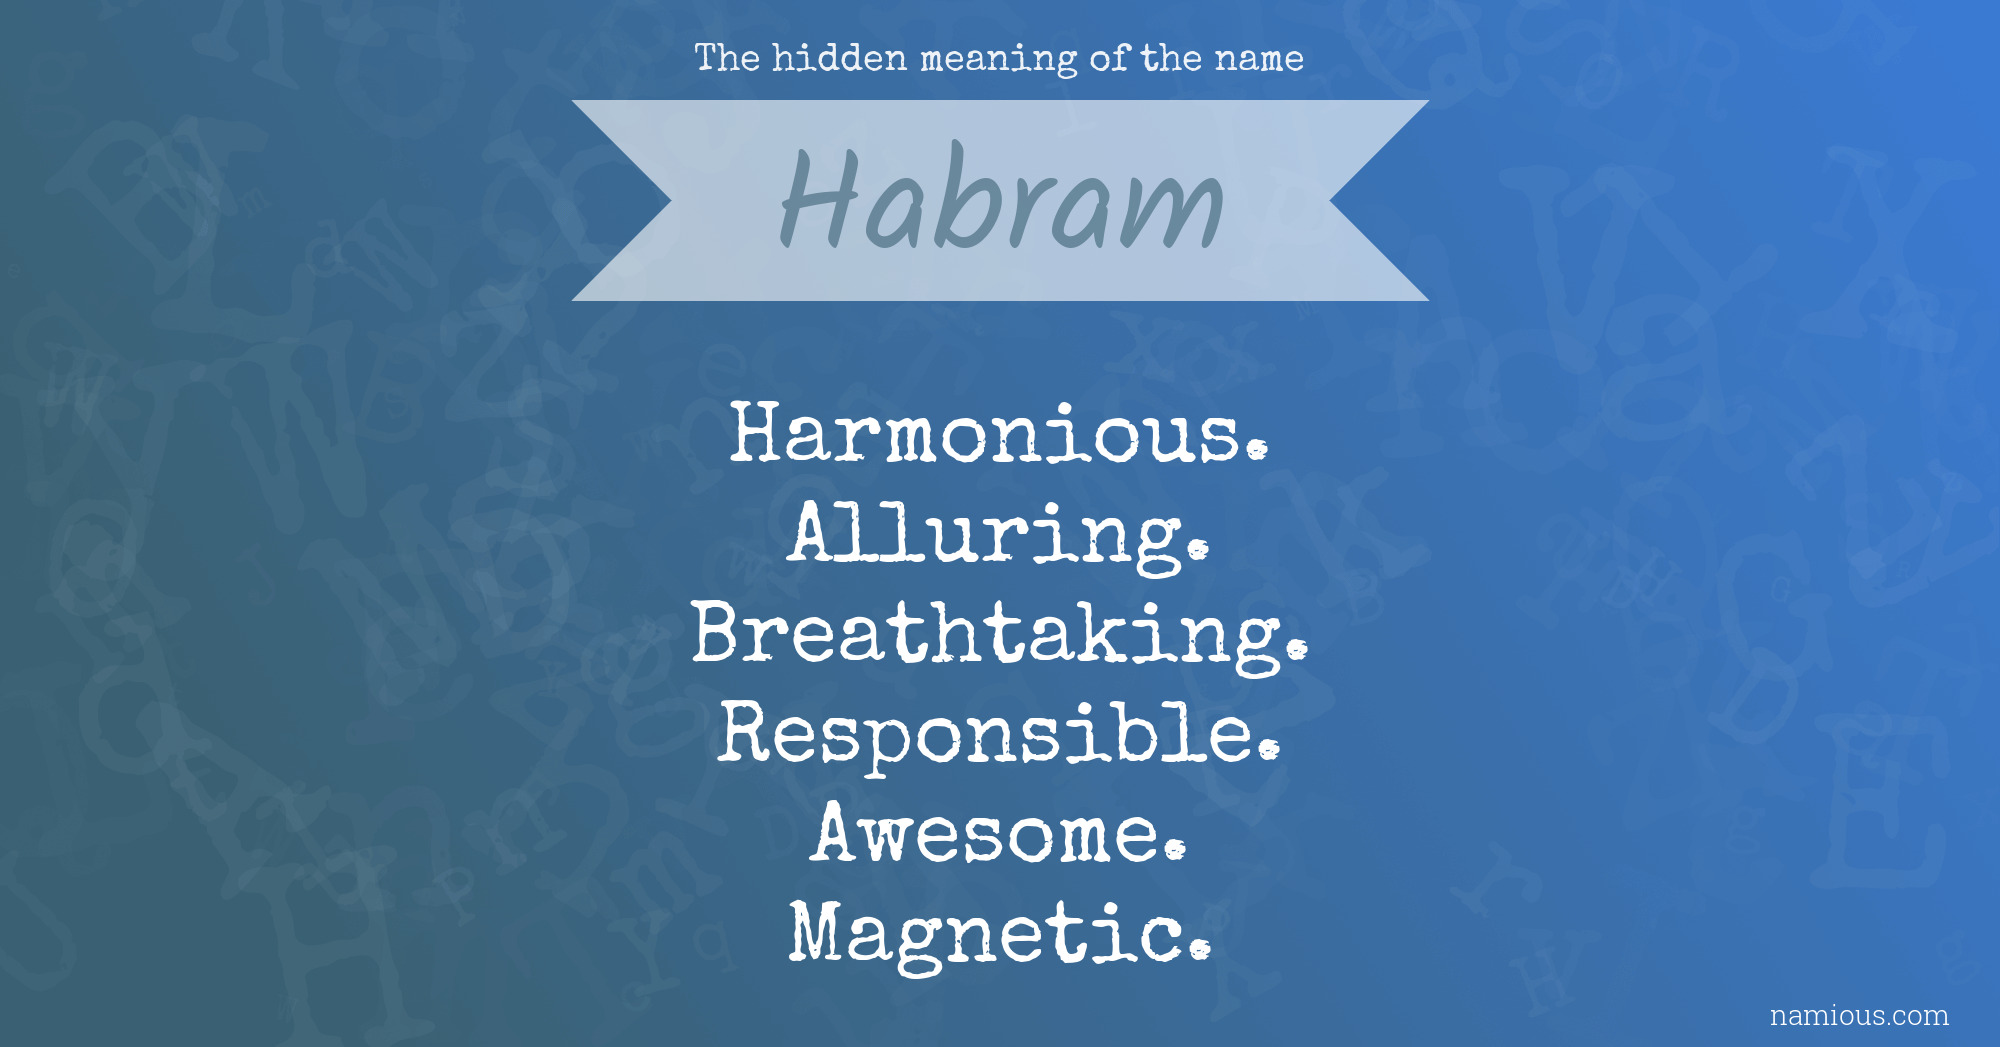 The hidden meaning of the name Habram